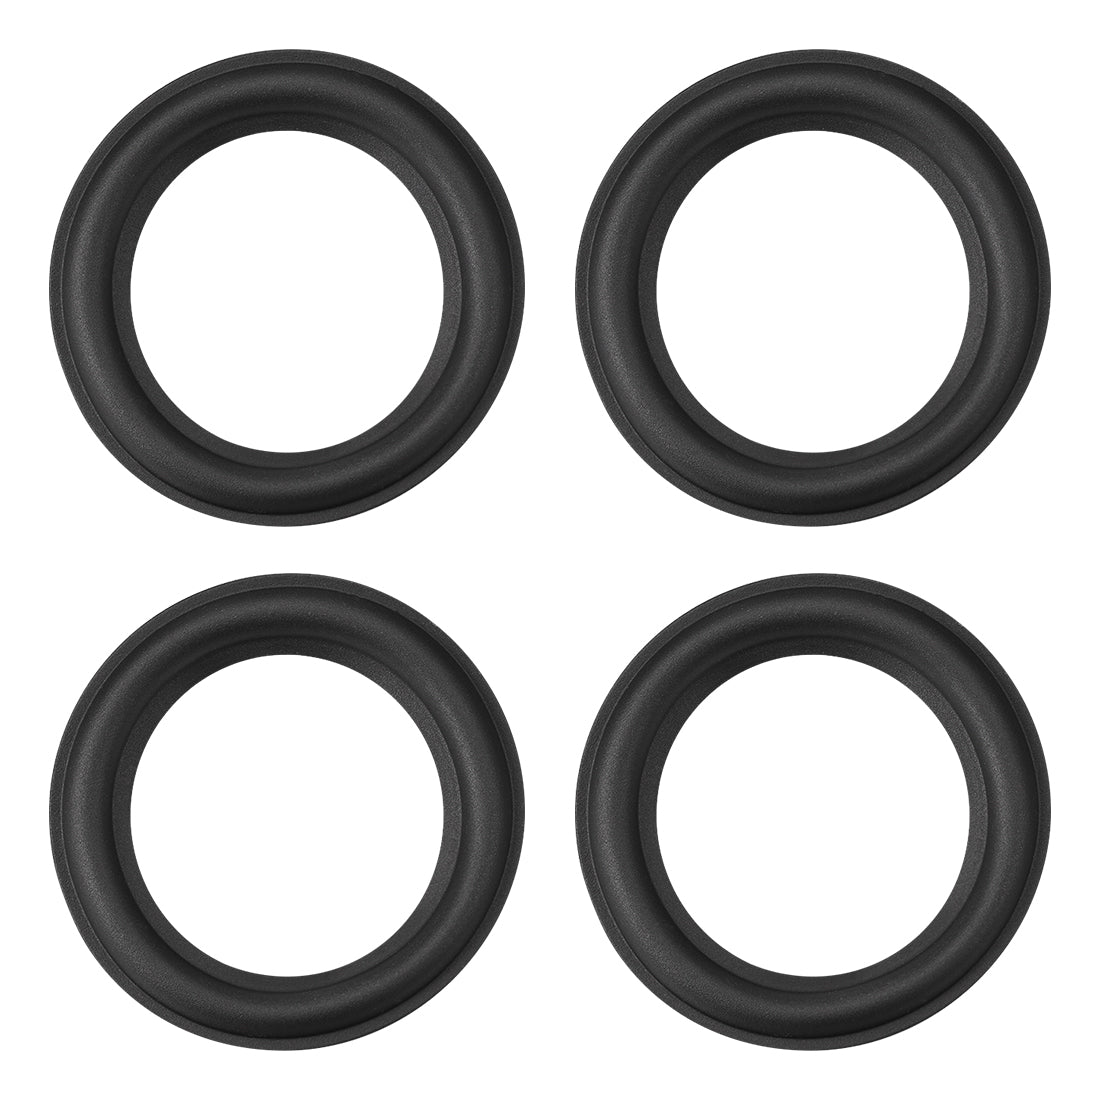 uxcell Uxcell 2.75" 2.75 Inch Rubber Edge Surround Rings Replacement Part for 4pcs